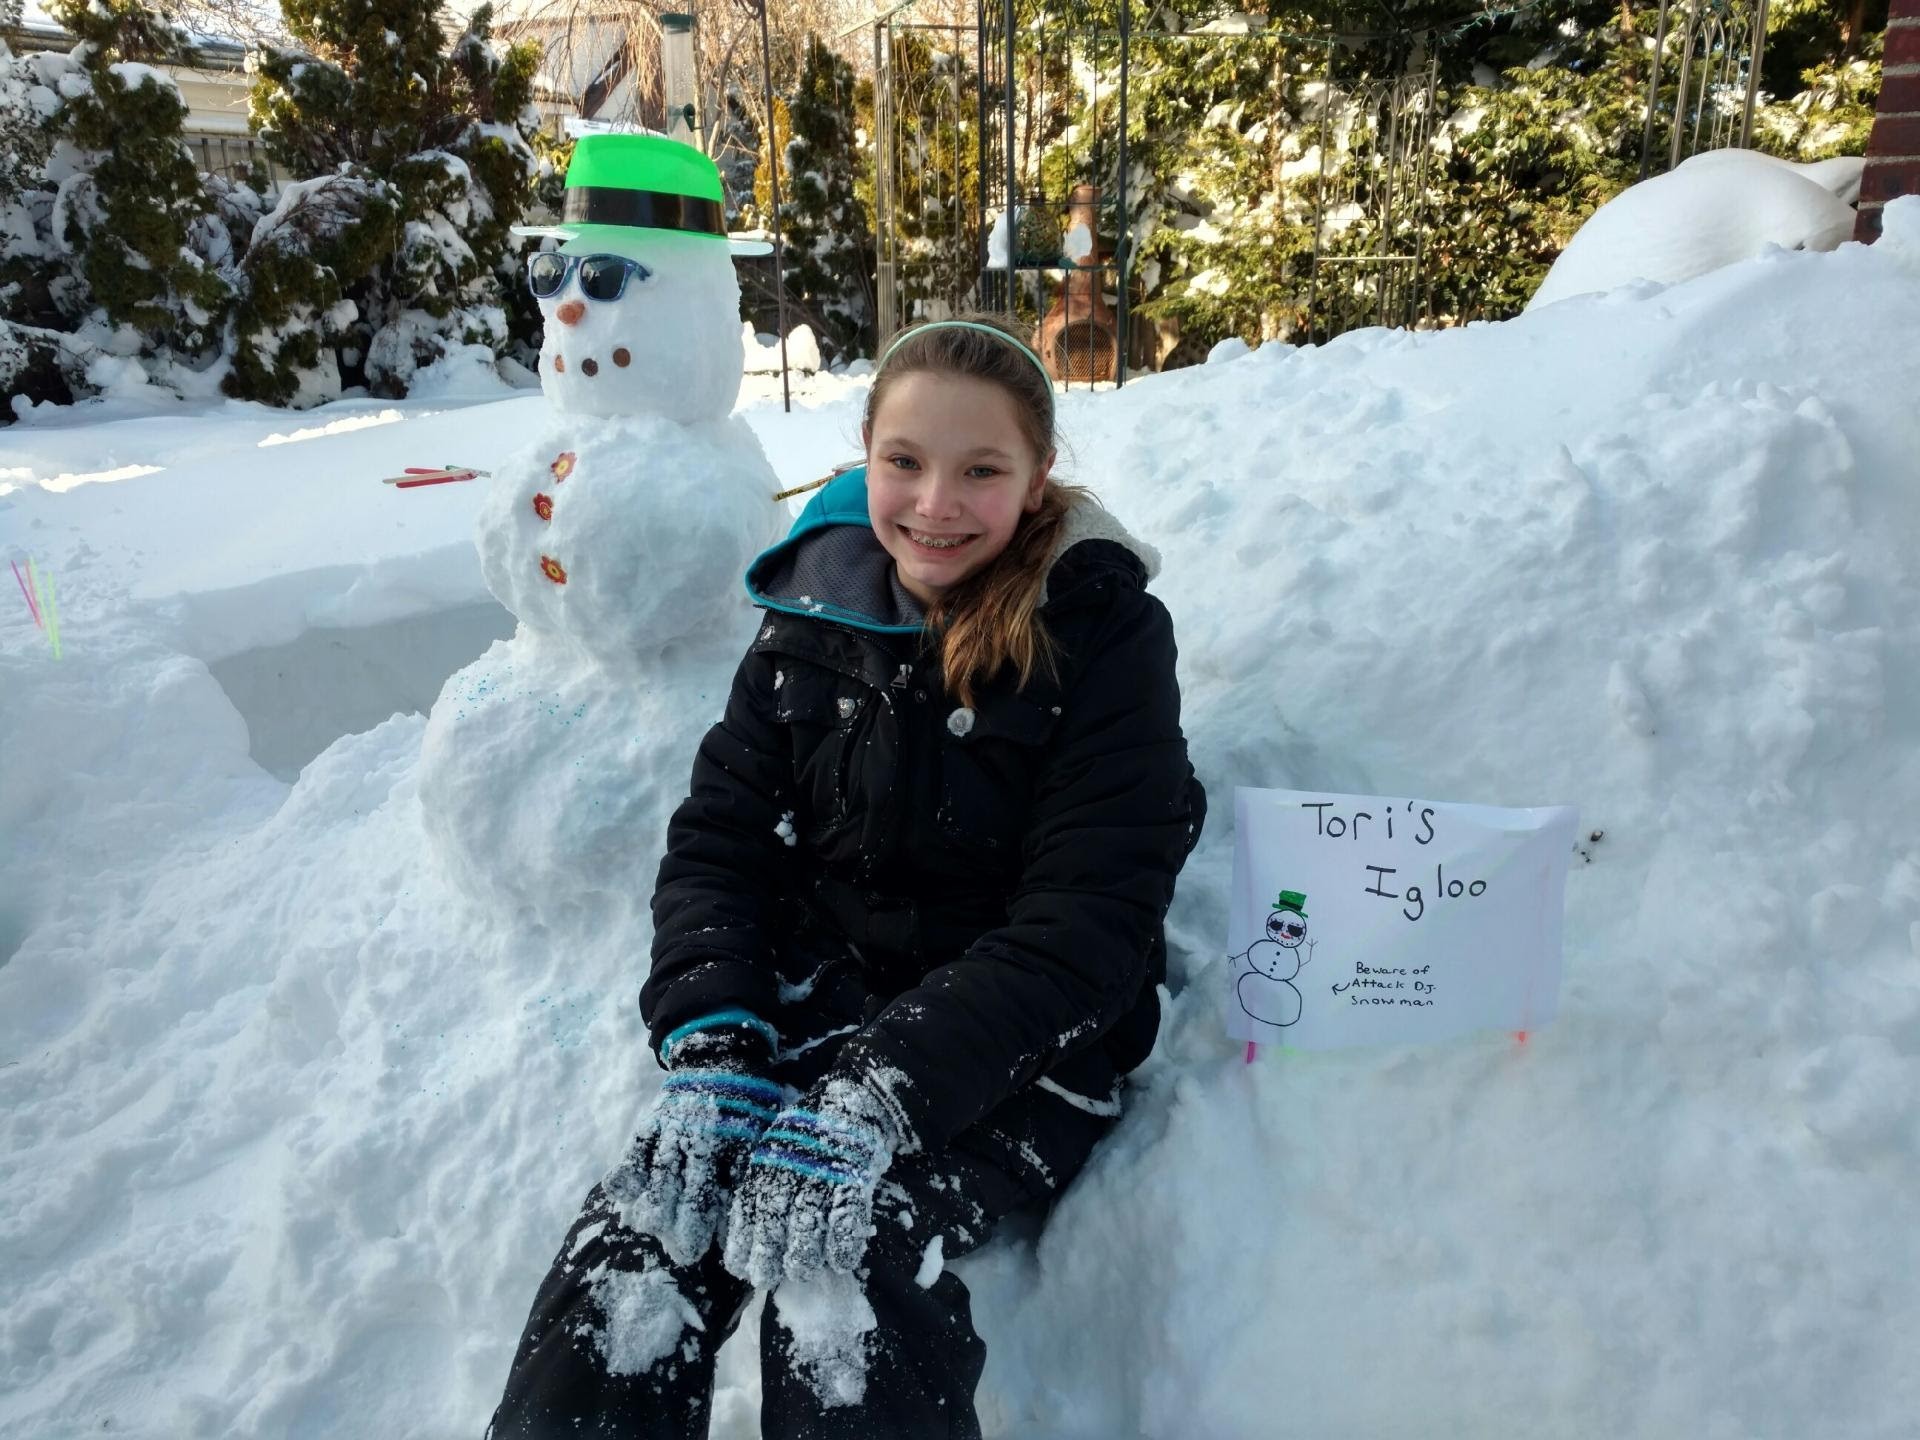 Victoria Andreo, 10, set up a   snowman DJ outside an igloo she    created in her family’s yard.